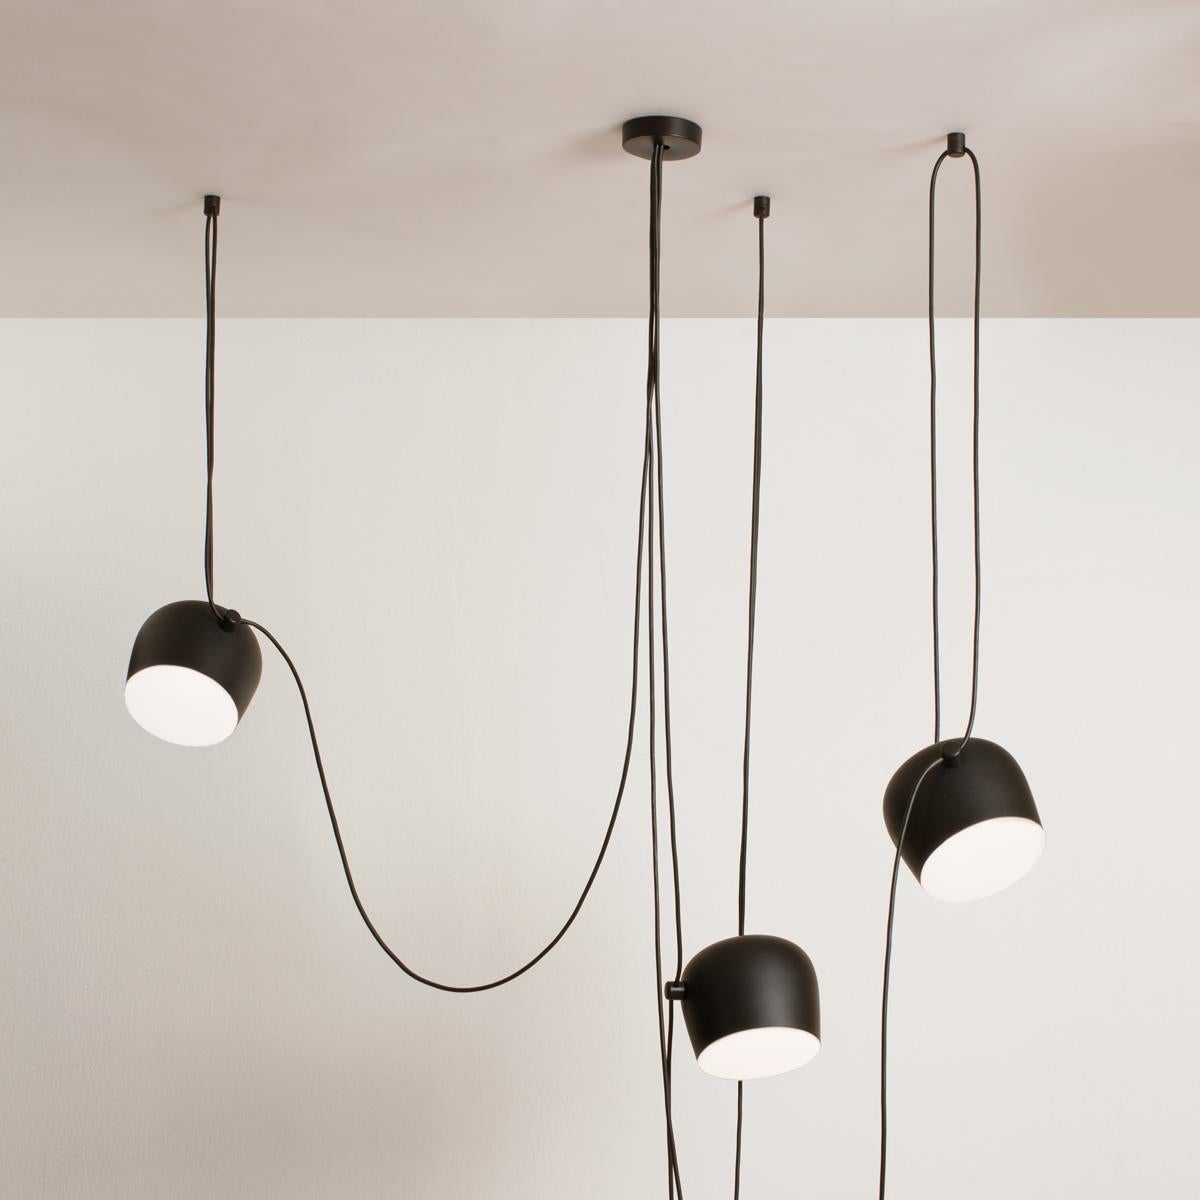 Contemporary Bouroullec Modern Black Custom Small Aim Light Hanging Pendant or Bedside, FLOS